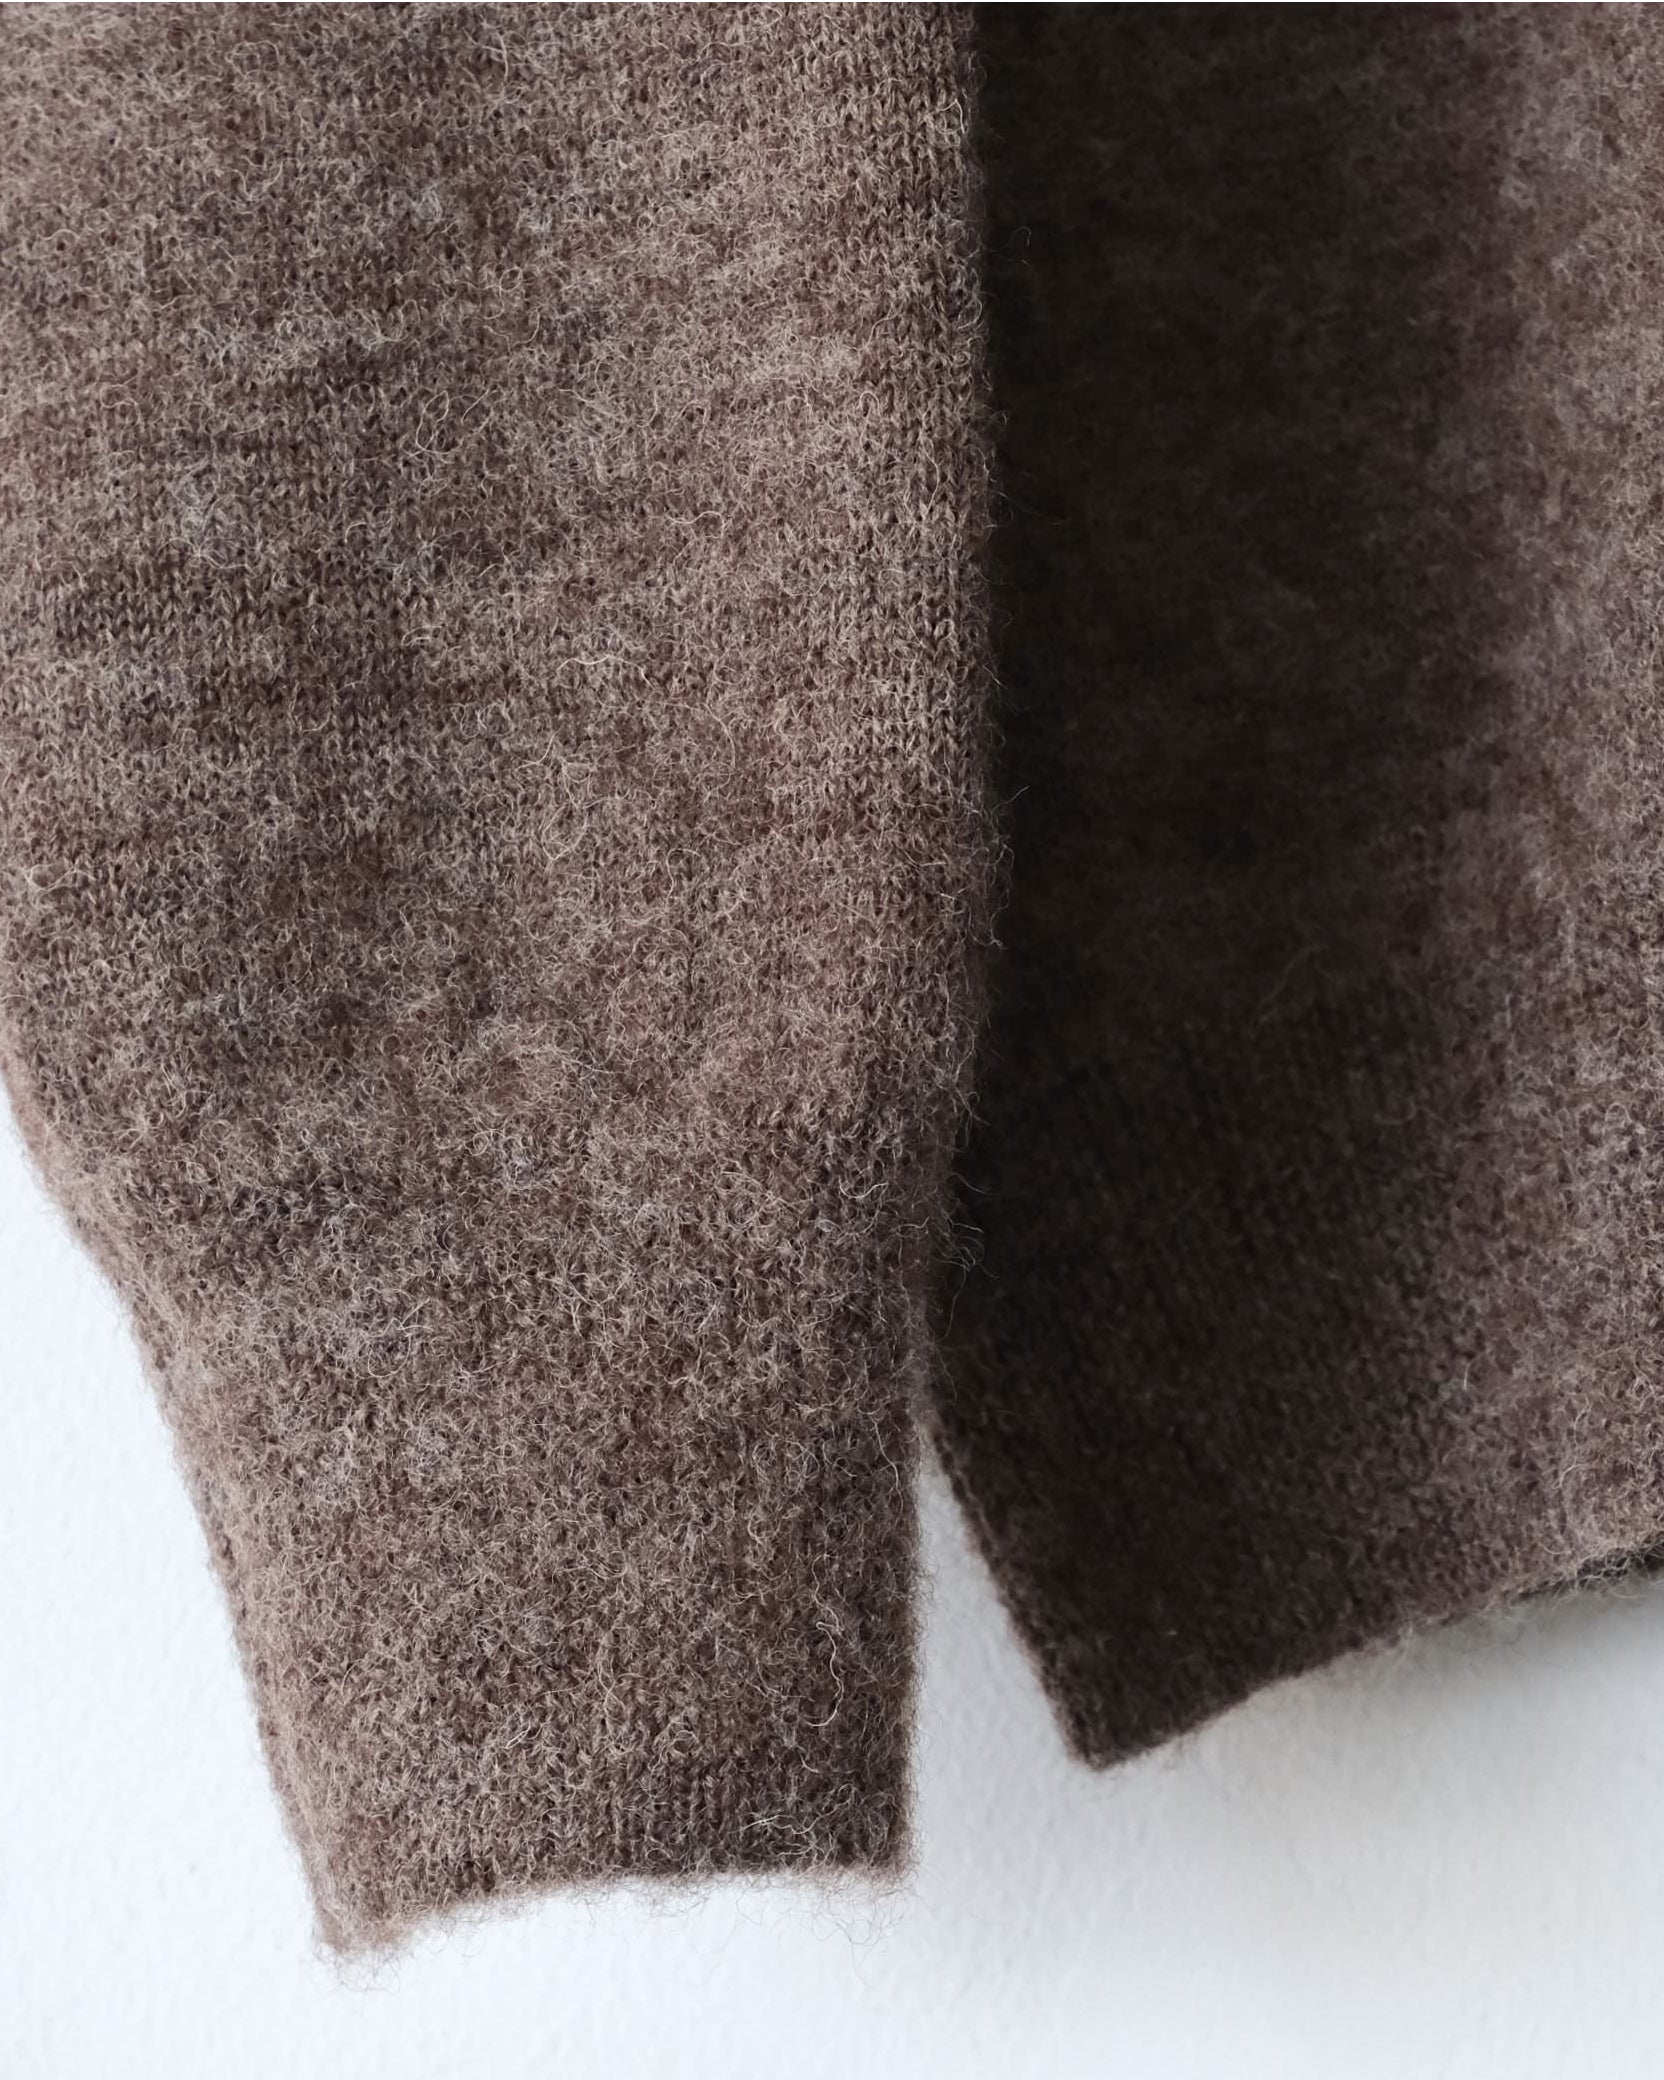 C/N Knit Sweater - Brown AW22